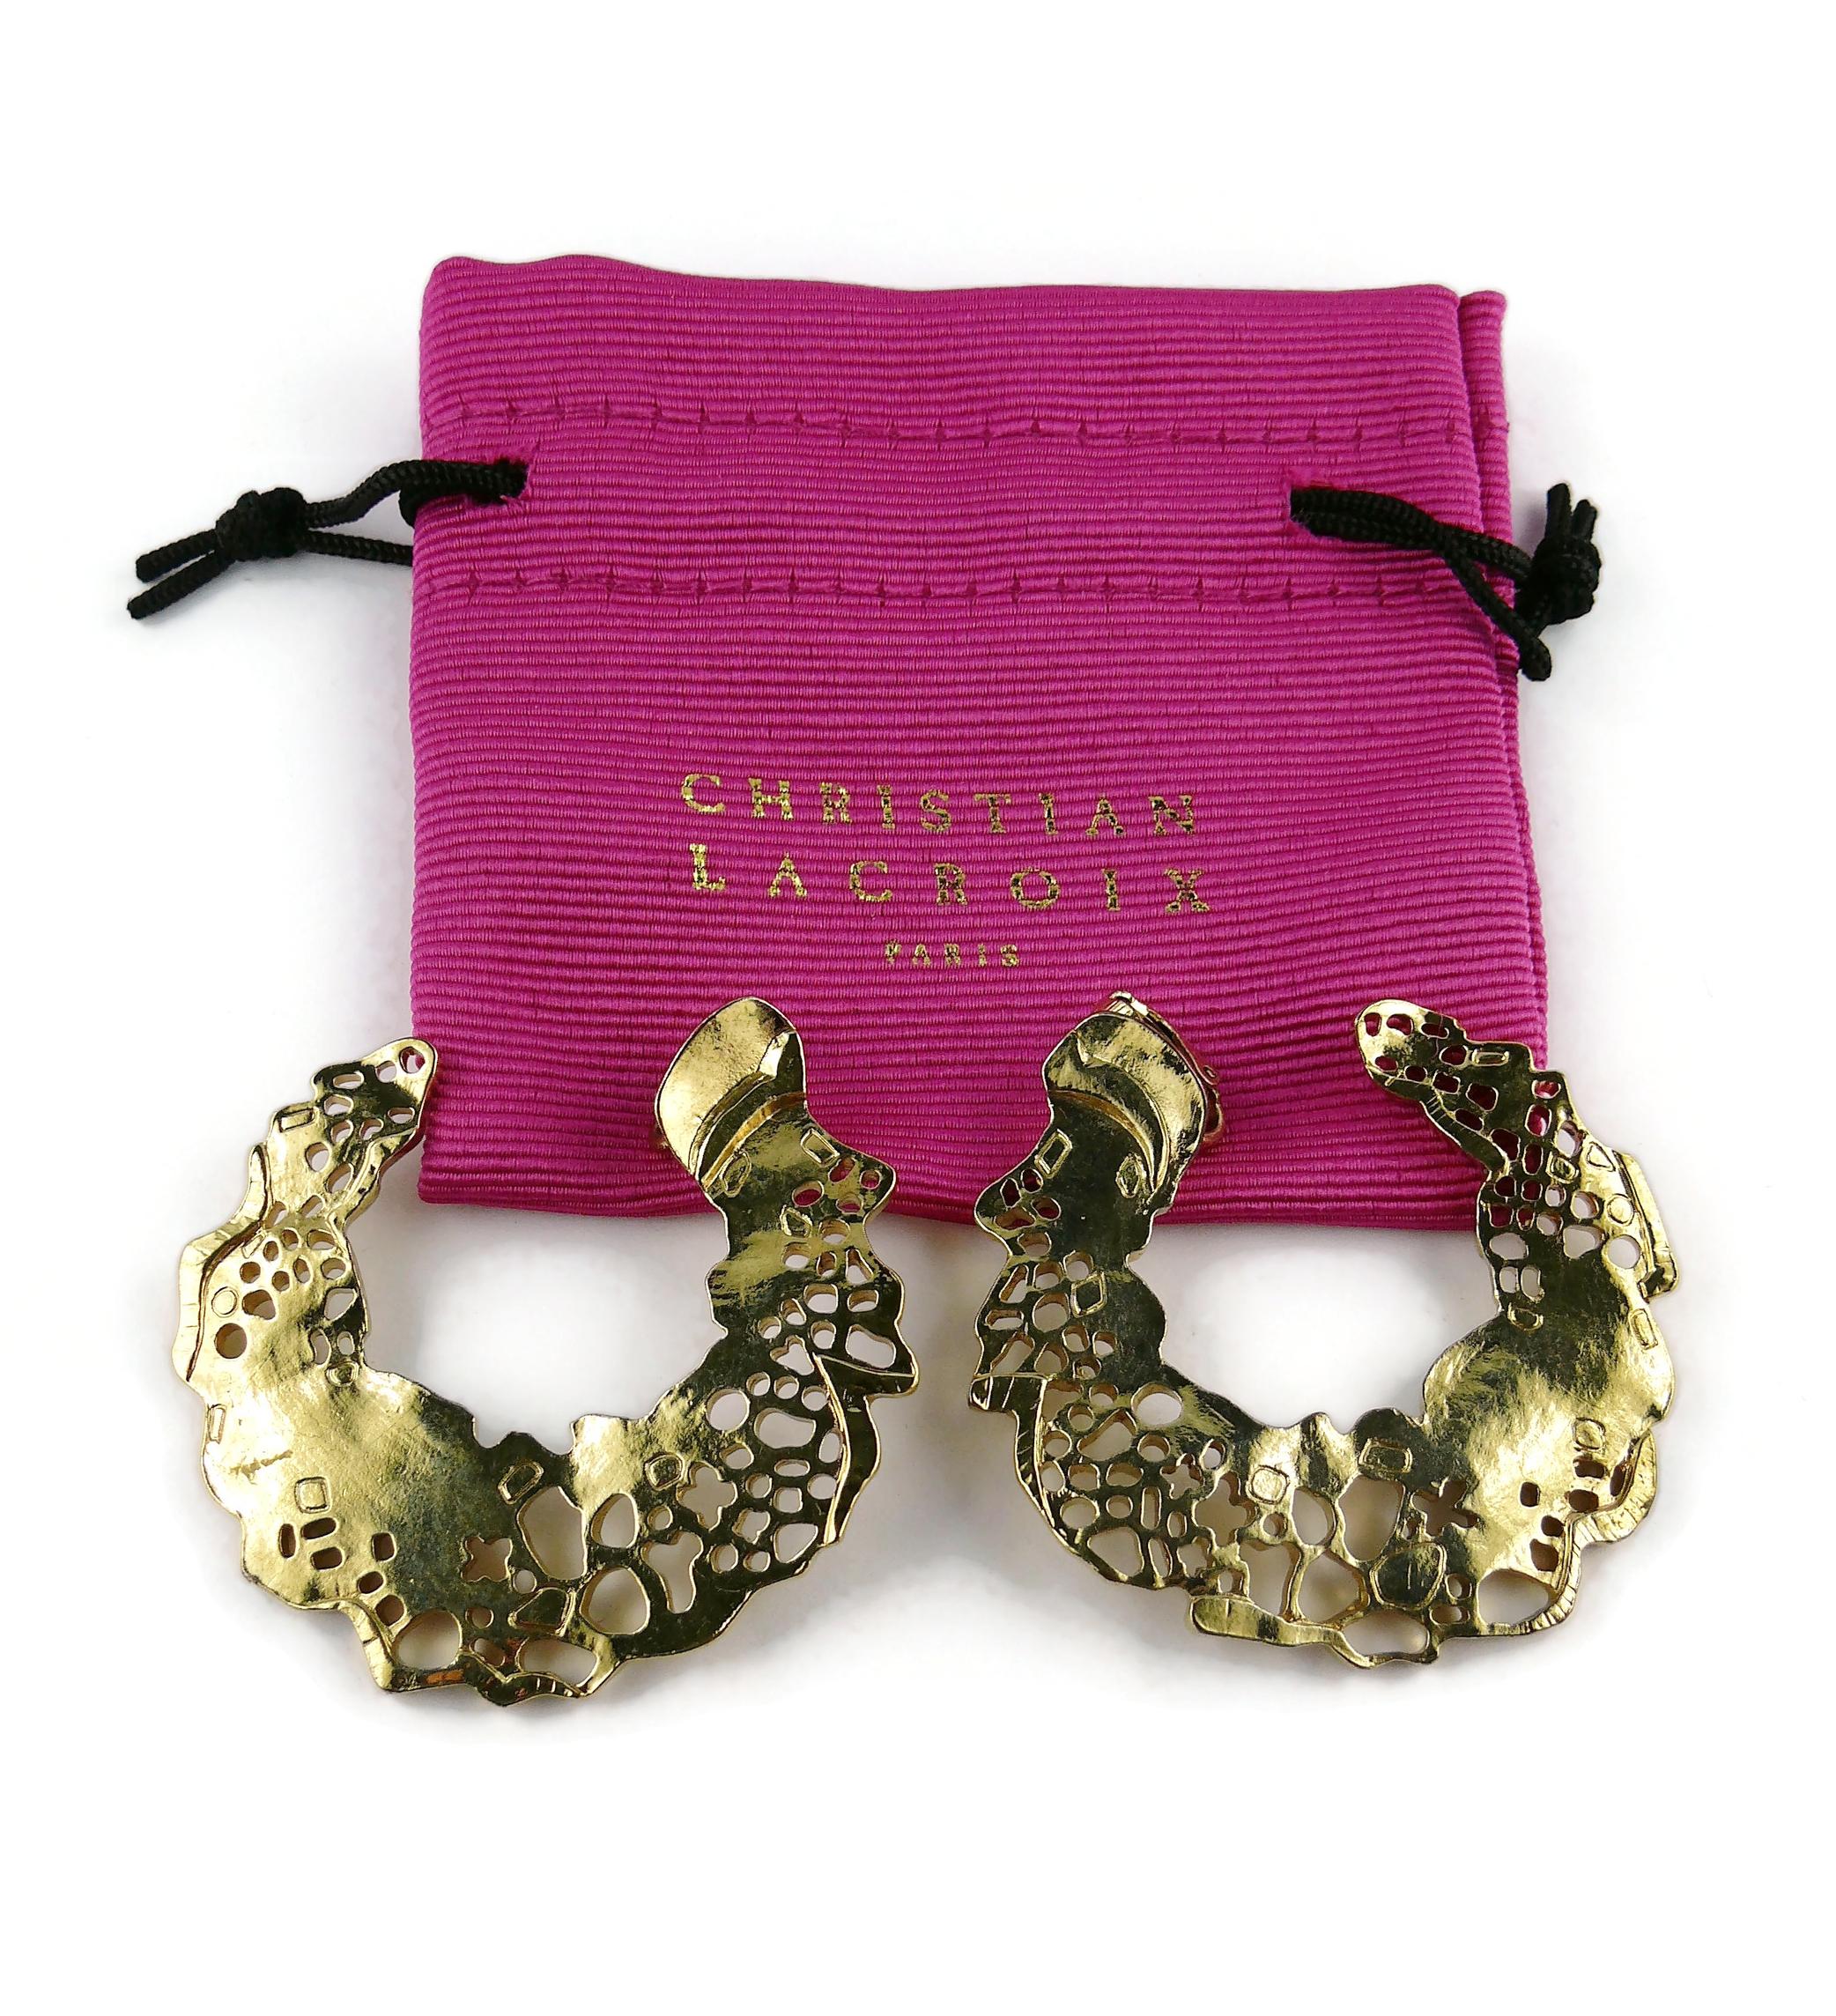 CHRISTIAN LACROIX vintage gold toned hoop earrings (clip-on) featuring a perforated design.

Marked CHRISTIAN LACROIX CL Made in France.

Indicative measurements : diameter approx. 5 cm (1.97 inches).

Come with a CHRISTIAN LACROIX dust